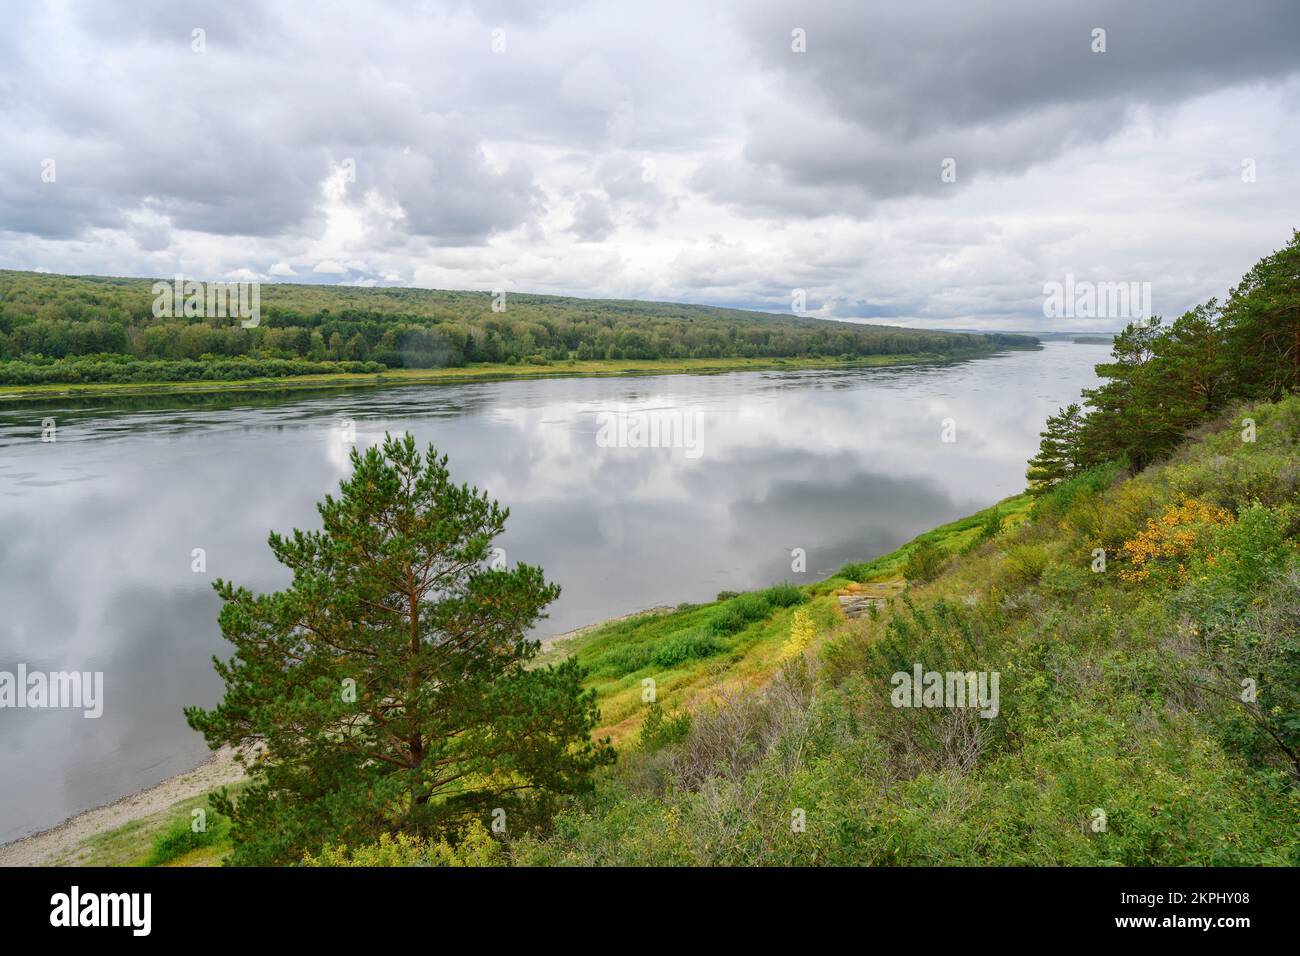 View of the Tom River in the Siberian taiga under a stormy sky in summer Stock Photo